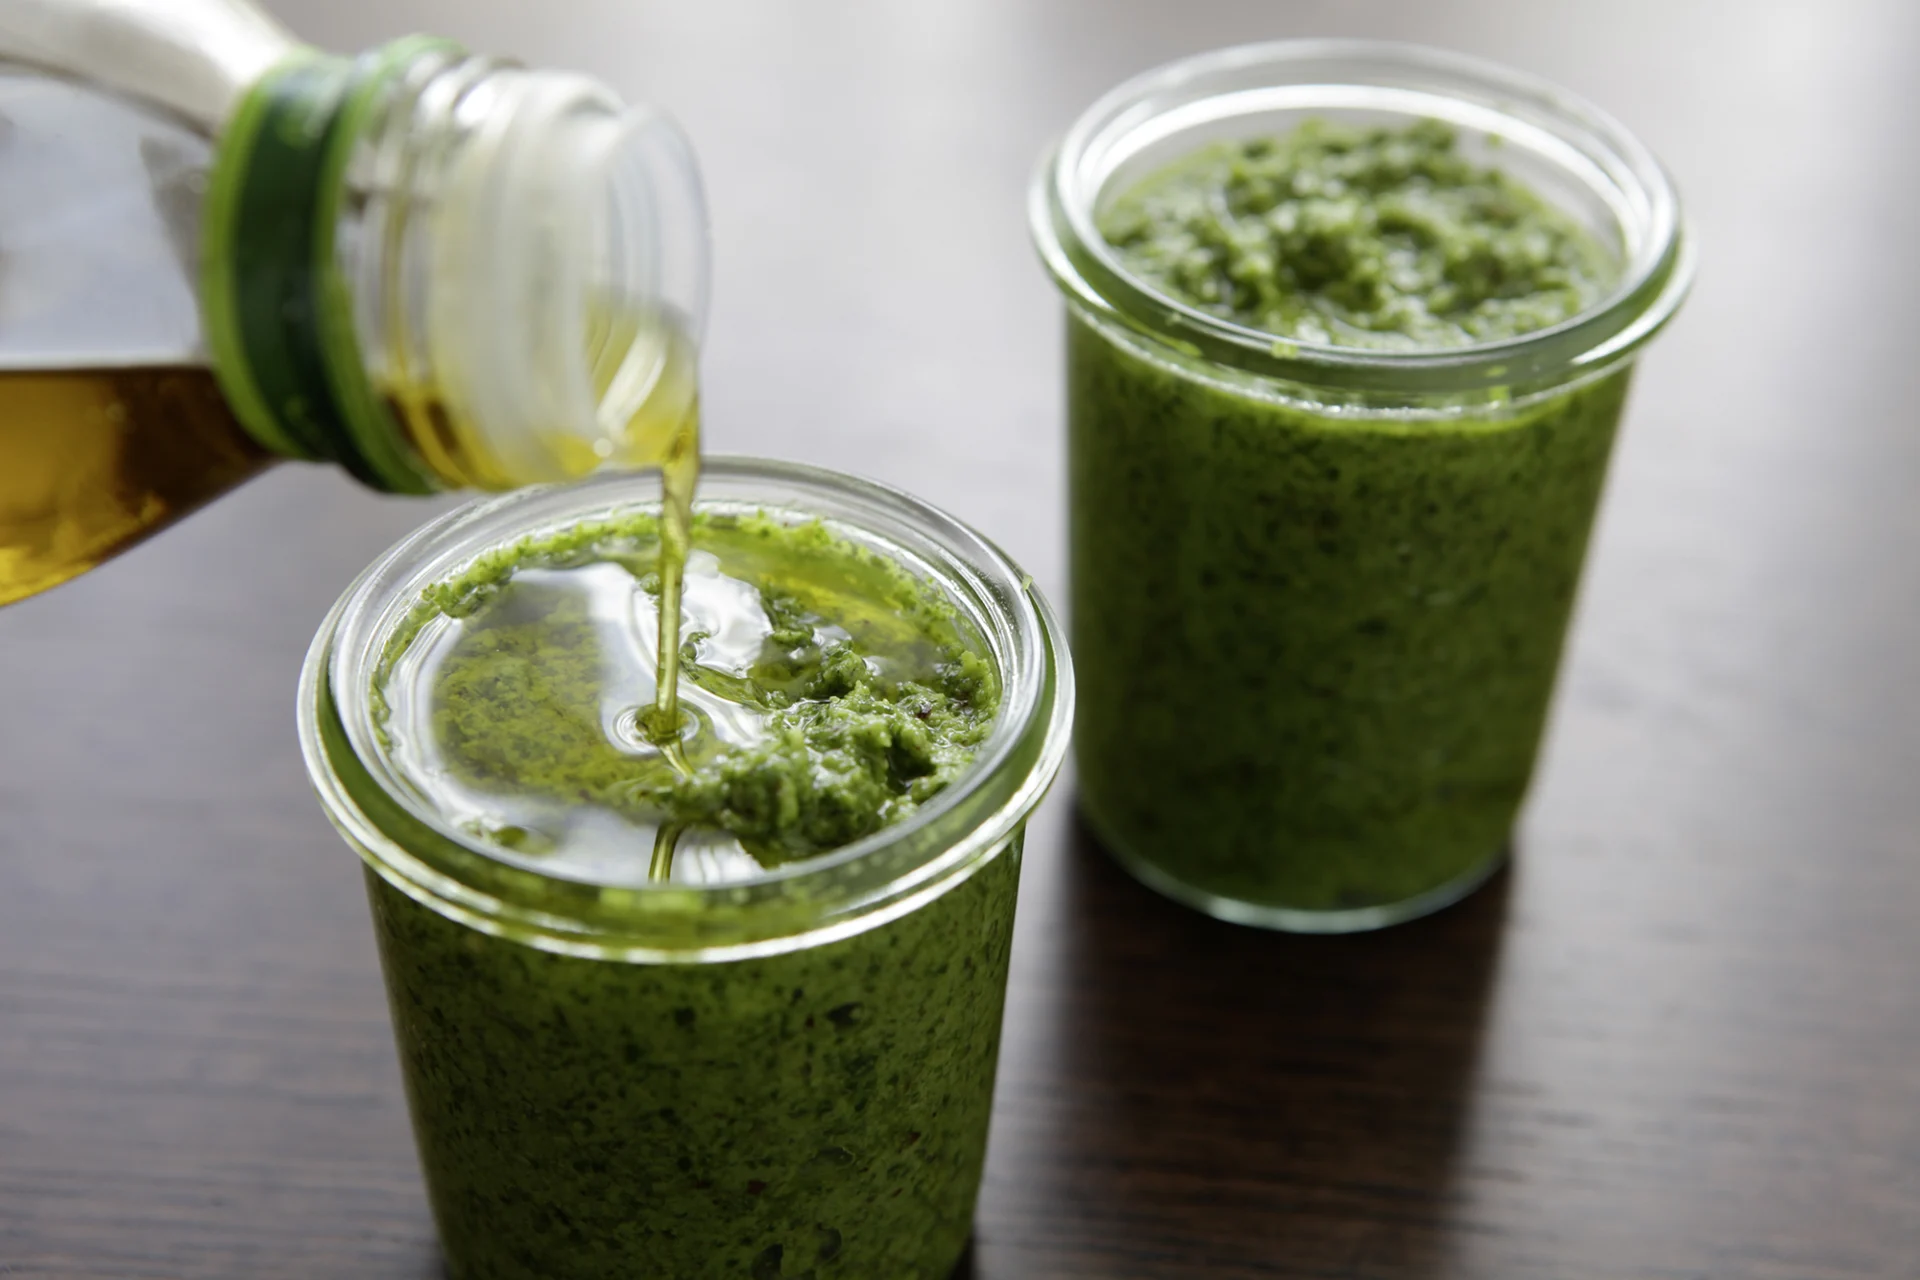 Two small jars filled with rocket pesto. Some oil is being poured into the jar on the left.